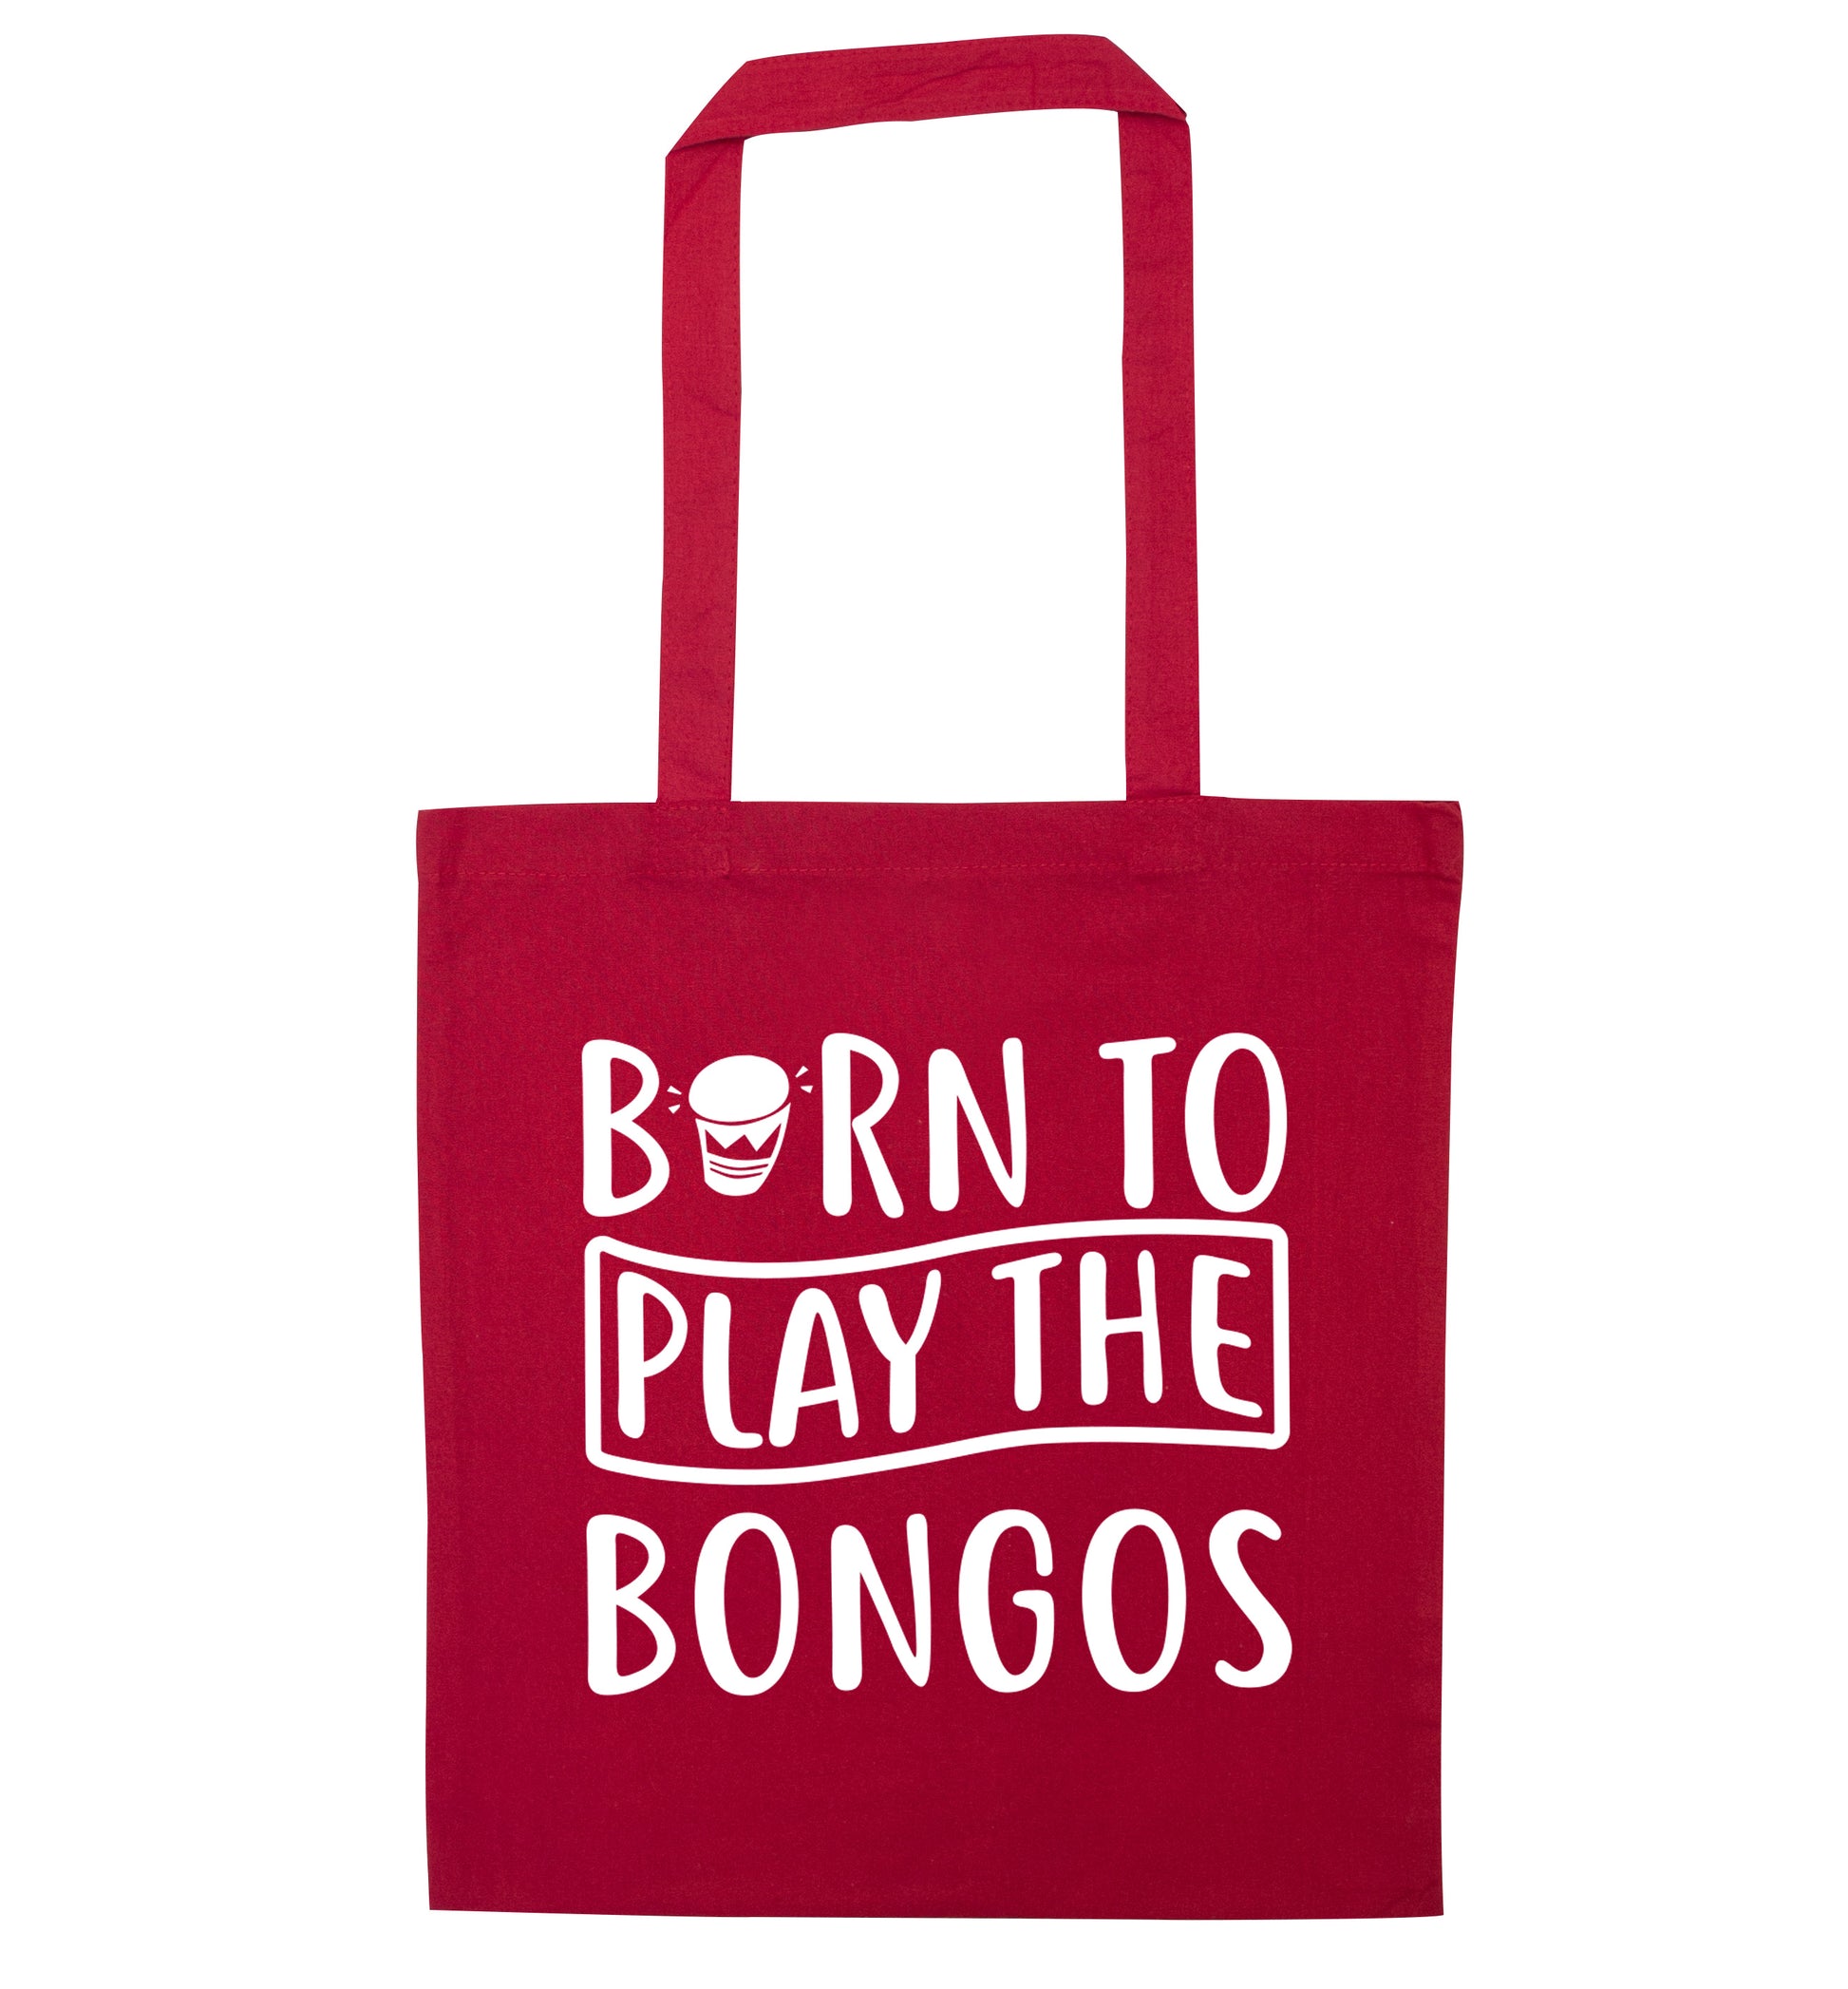 Born to play the bongos red tote bag